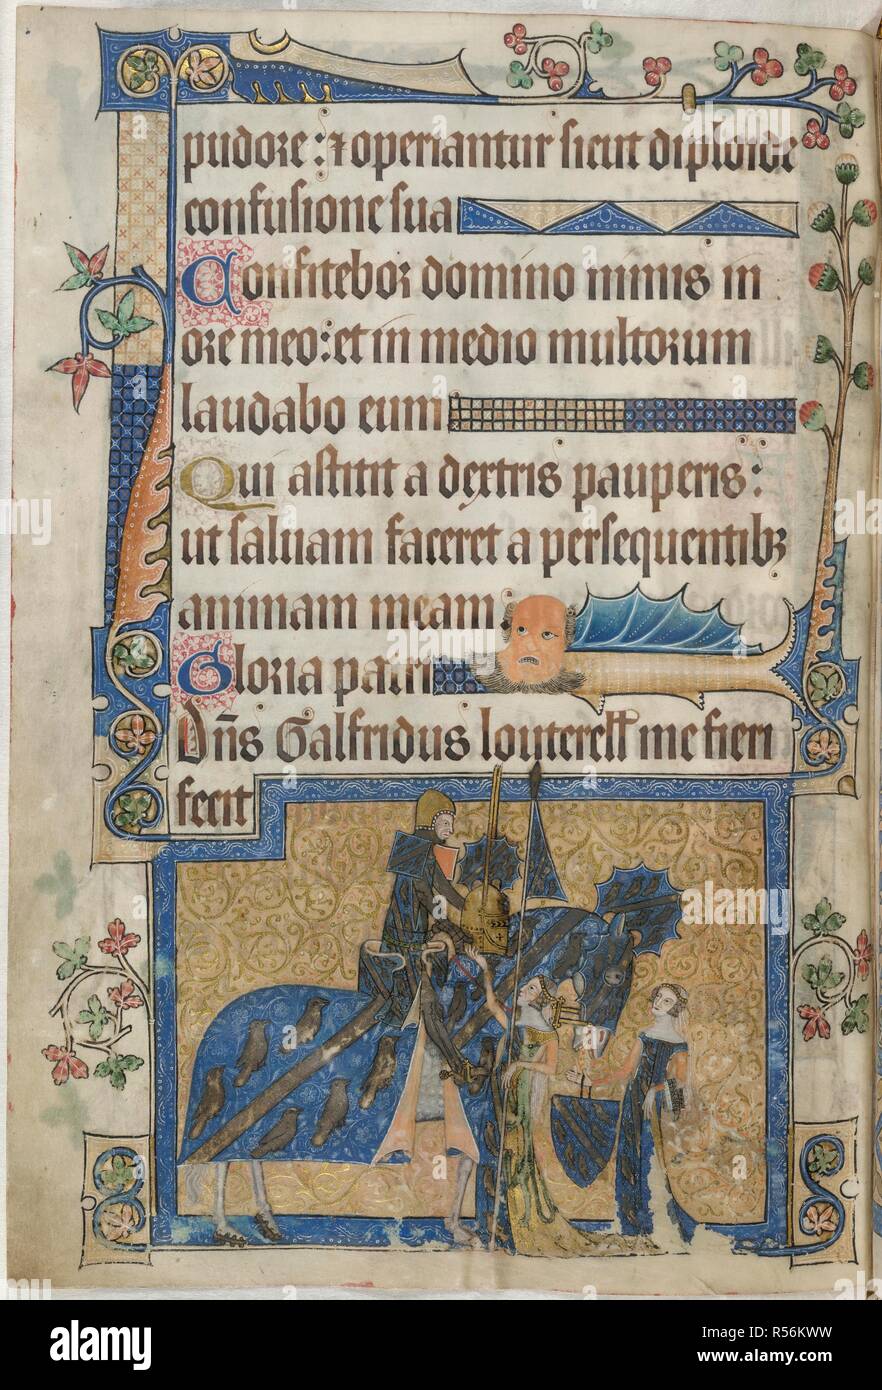 [Whole folio] End of Psalm 108. Marginal decoration. Below, Sir Geoffrey Luttrell mounted, attended by his wife, Agnes Sutton, with his helm and lance, and his daughter-in-law, Beatrice Scrope, who holds his shield. Both are dressed in heraldic gowns. Sir Geoffrey is shown wearing armour, including gilt bascinet without visor, silver mail with plates on the elbow, plated gauntlets, and gilt rowelled spurs. The Luttrell arms appear on his large square ailettes, his surcoat, the fan-crest of his helm, the pennon of his lance, his shield, and the trappings on his horse. Luttrell Psalter. England  Stock Photo